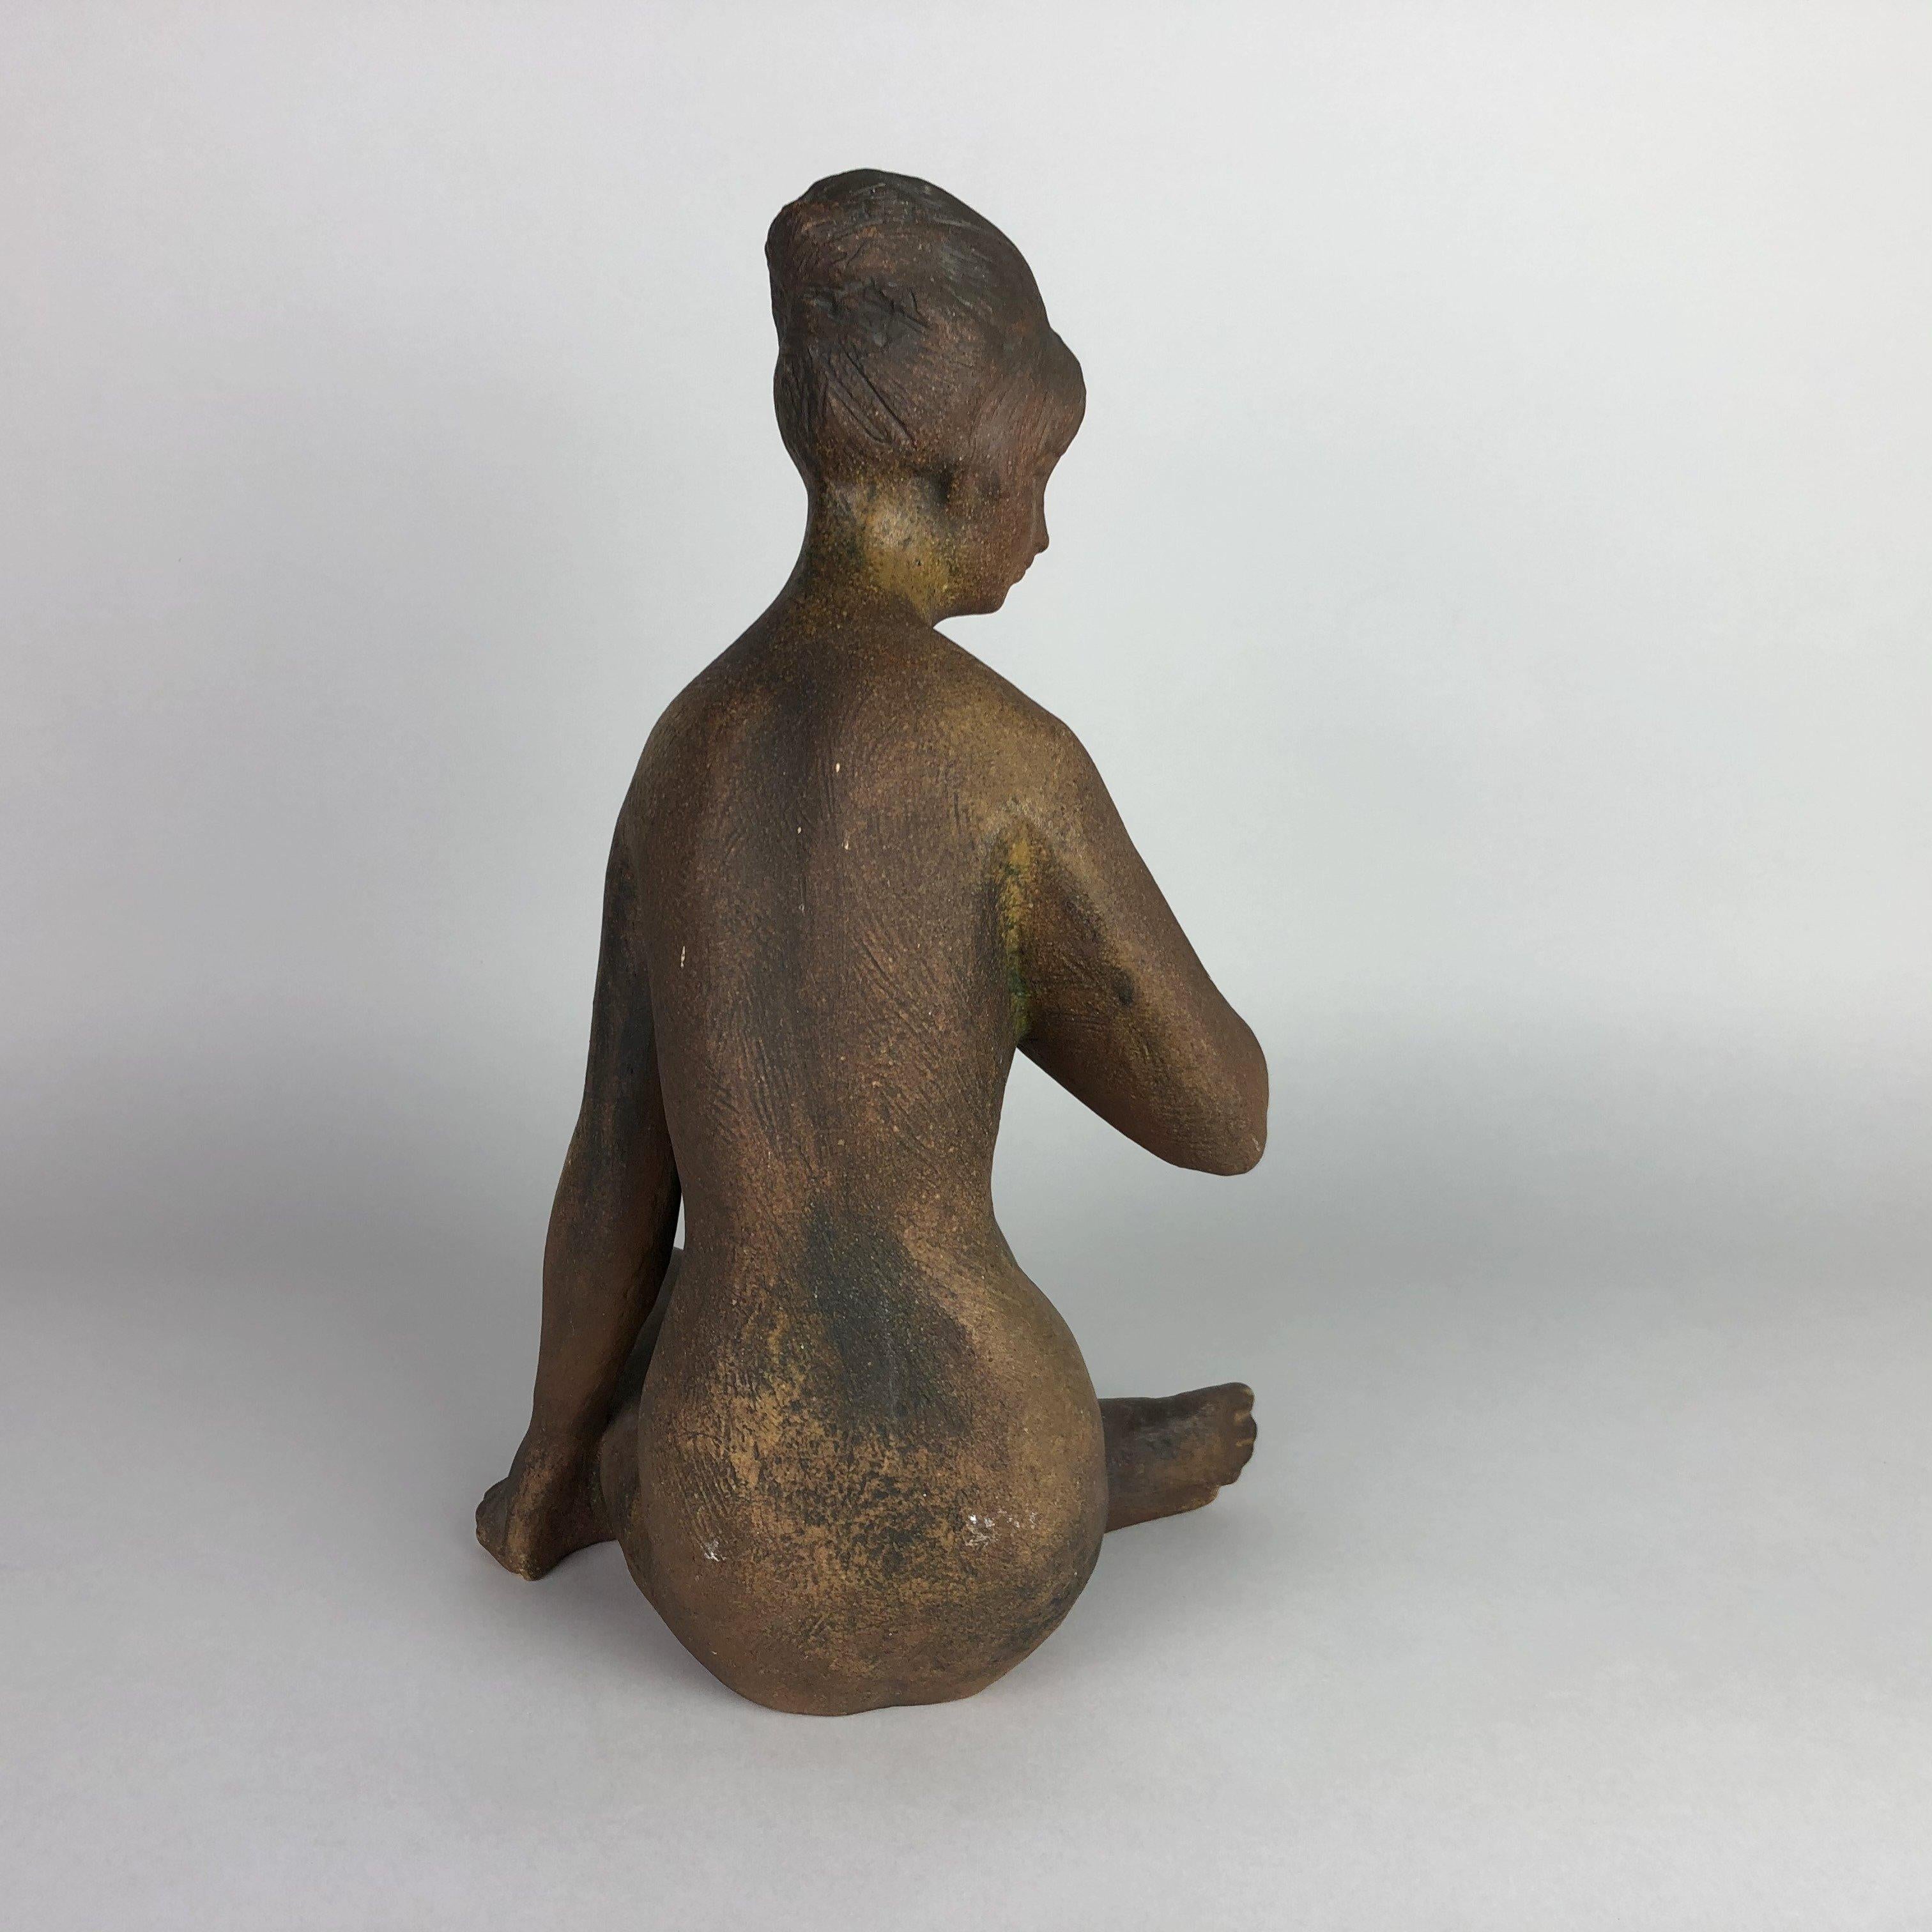 Czech Mid-century Sculpture Signed by Bohumil Kokrda, 1967 